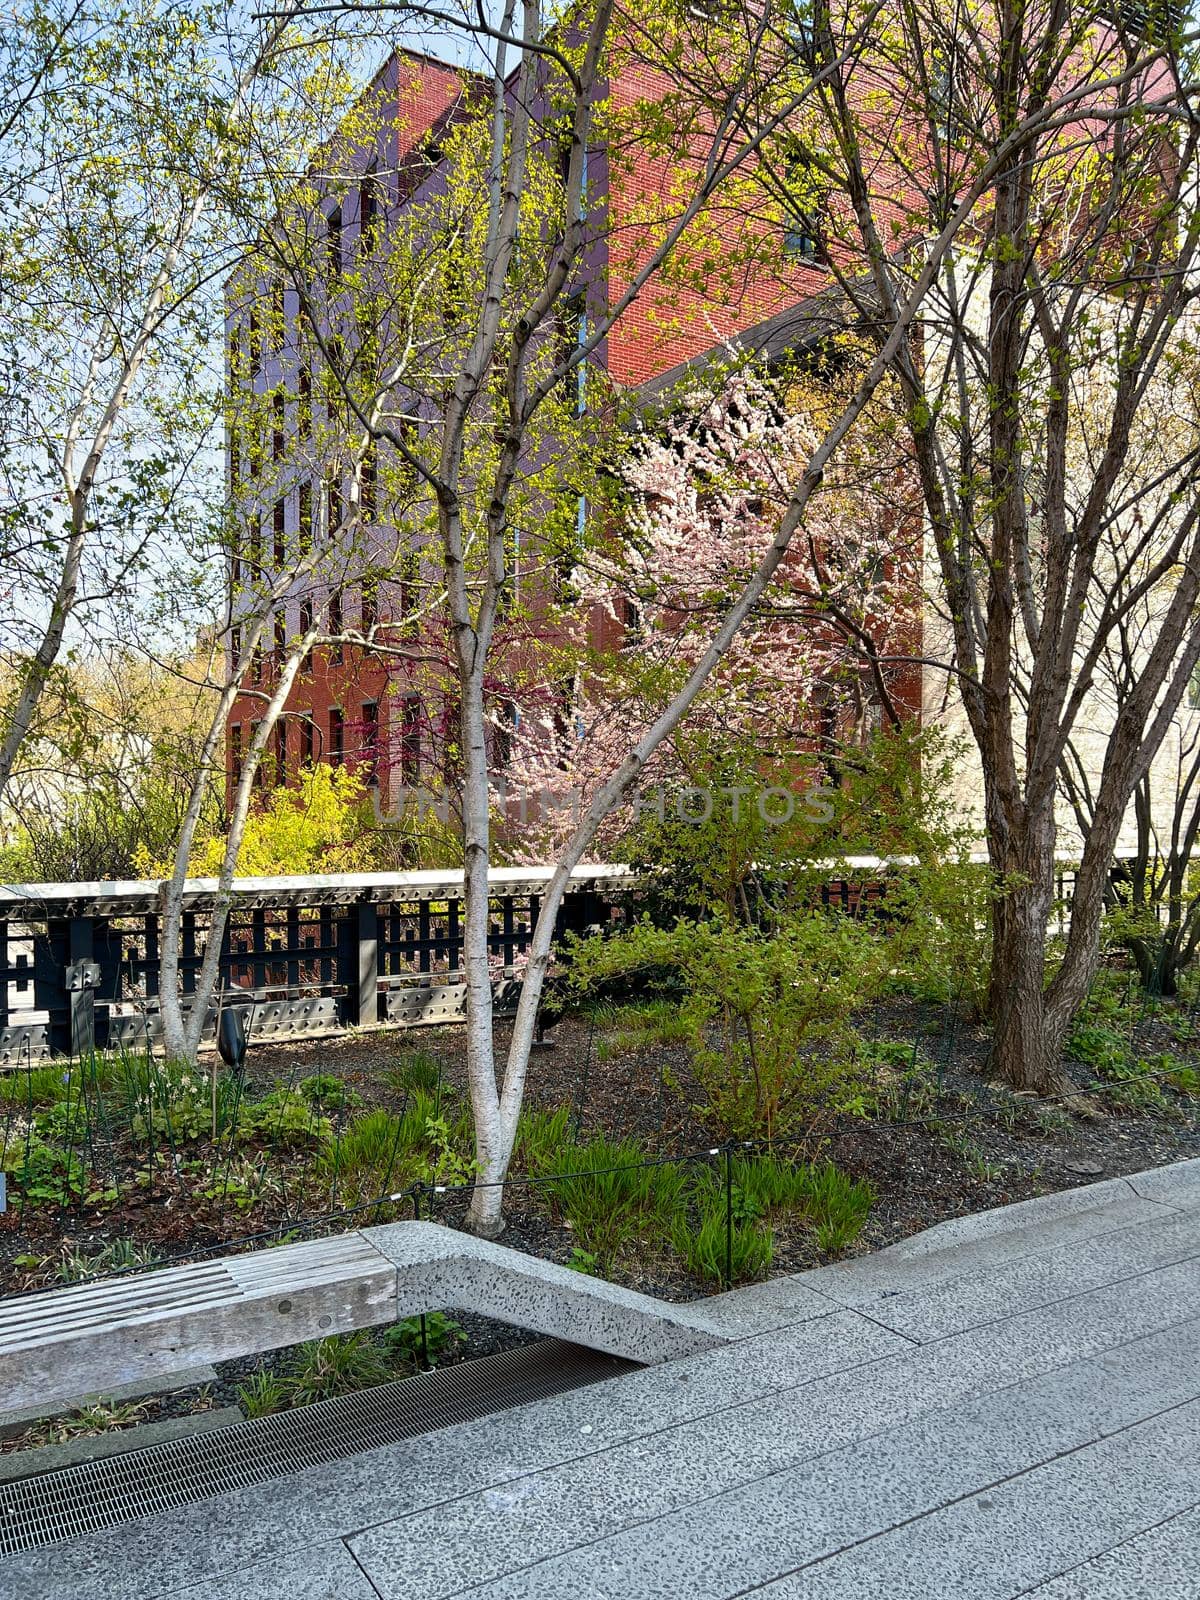 The High Line 1.45 mile long elevated linear park, greenway and rail trail created on a former New York Central Railroad spur on the west side of Manhattan in New York City. USA, April 22nd, 2022